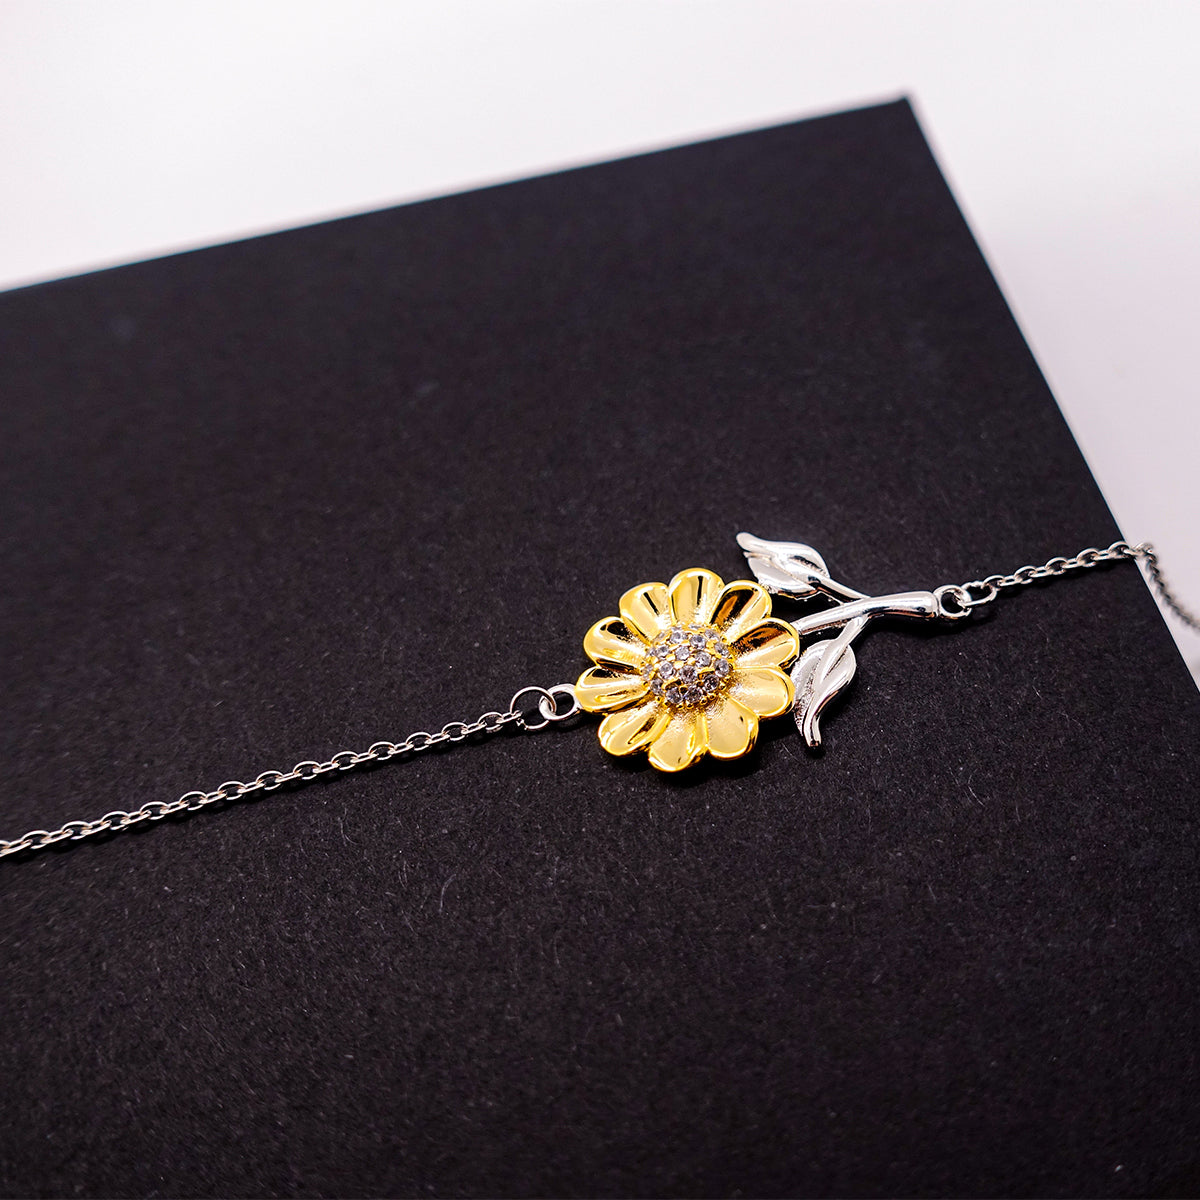 Nonna Sunflower Bracelet - You will always have a special place - Engraved Gift for Grandma, Birthday, Christmas, Mothers Day, Nonna